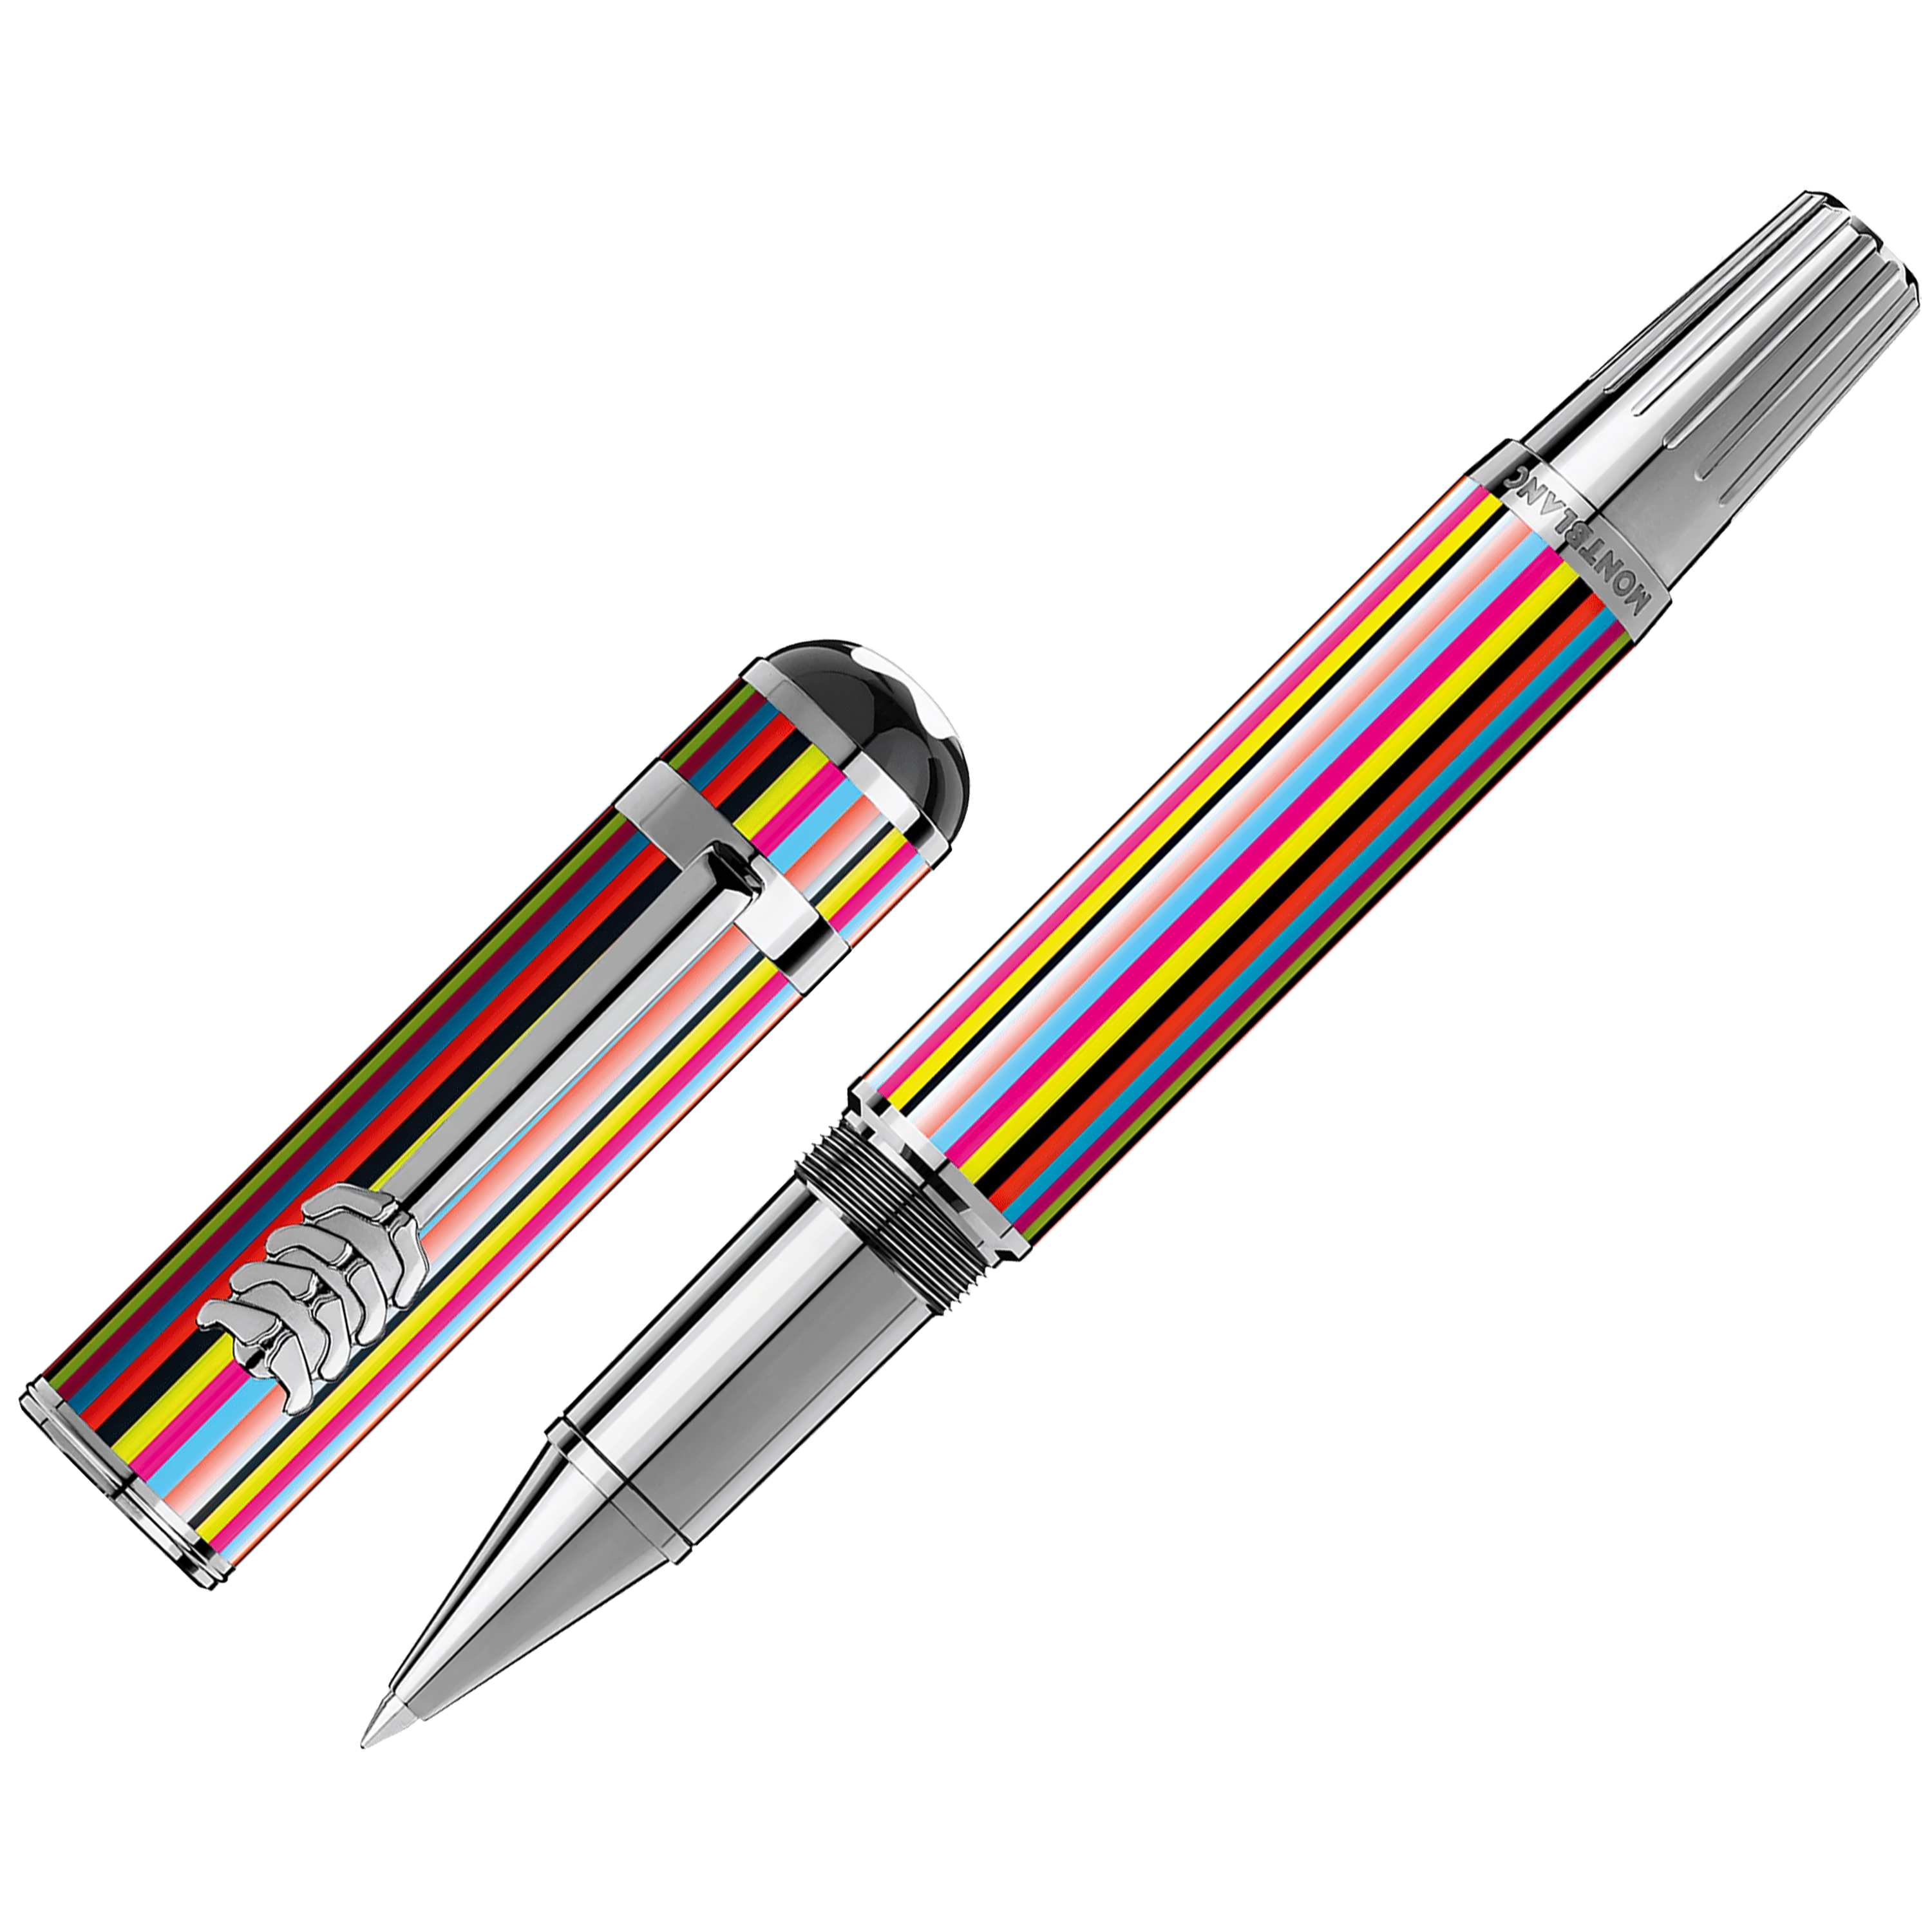 Montblanc　1941,　Rollerball　Pen　Special　The　Great　–　Characters　Malaysia　Gifts　Beatles　Edition　Since　Pen　Shop